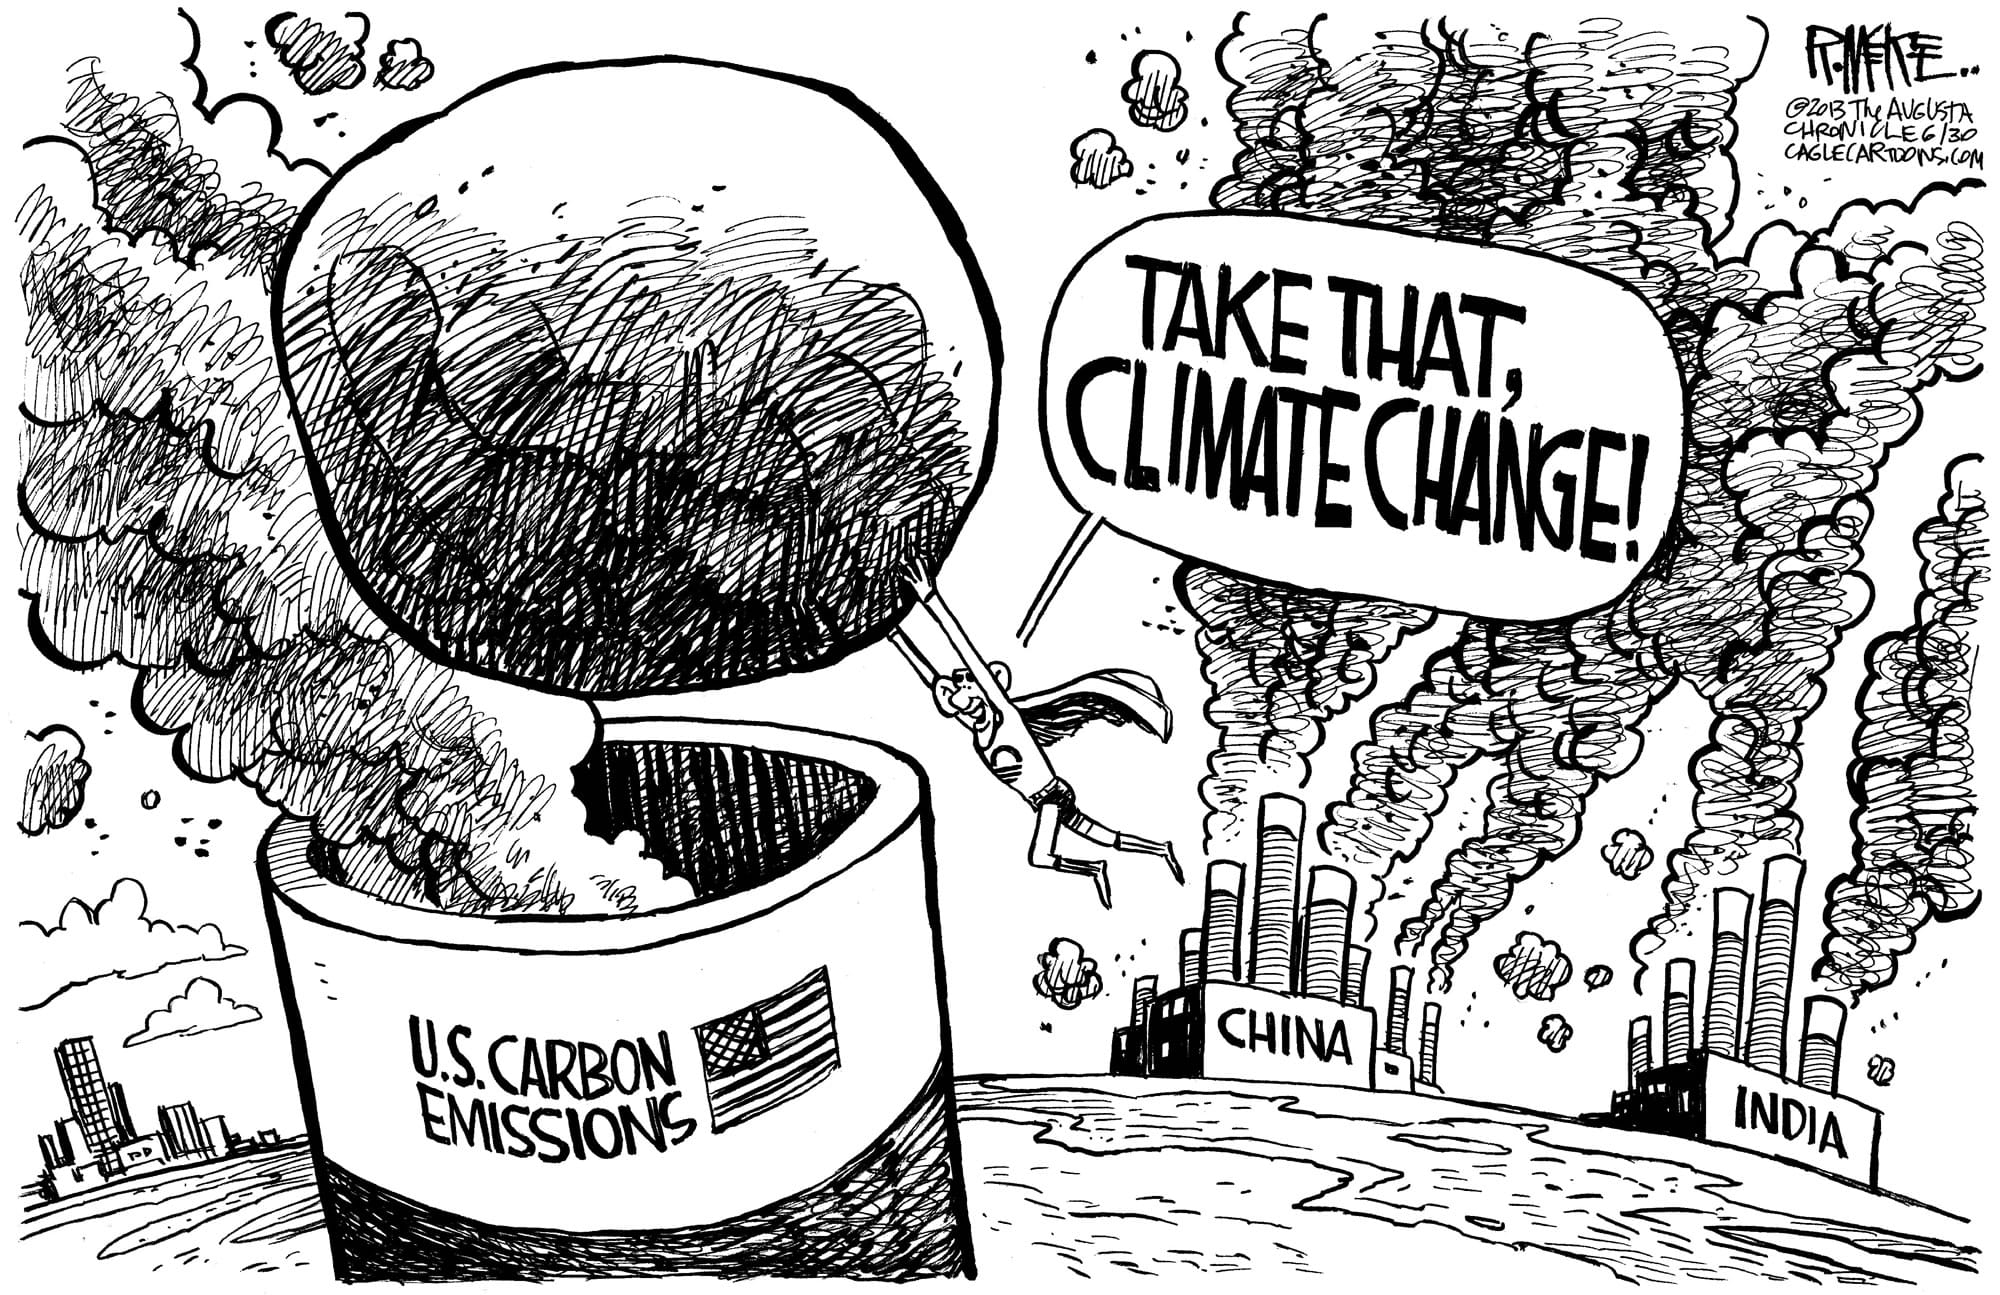 Editorial Cartoon: Combating Climate Change - The Columbian